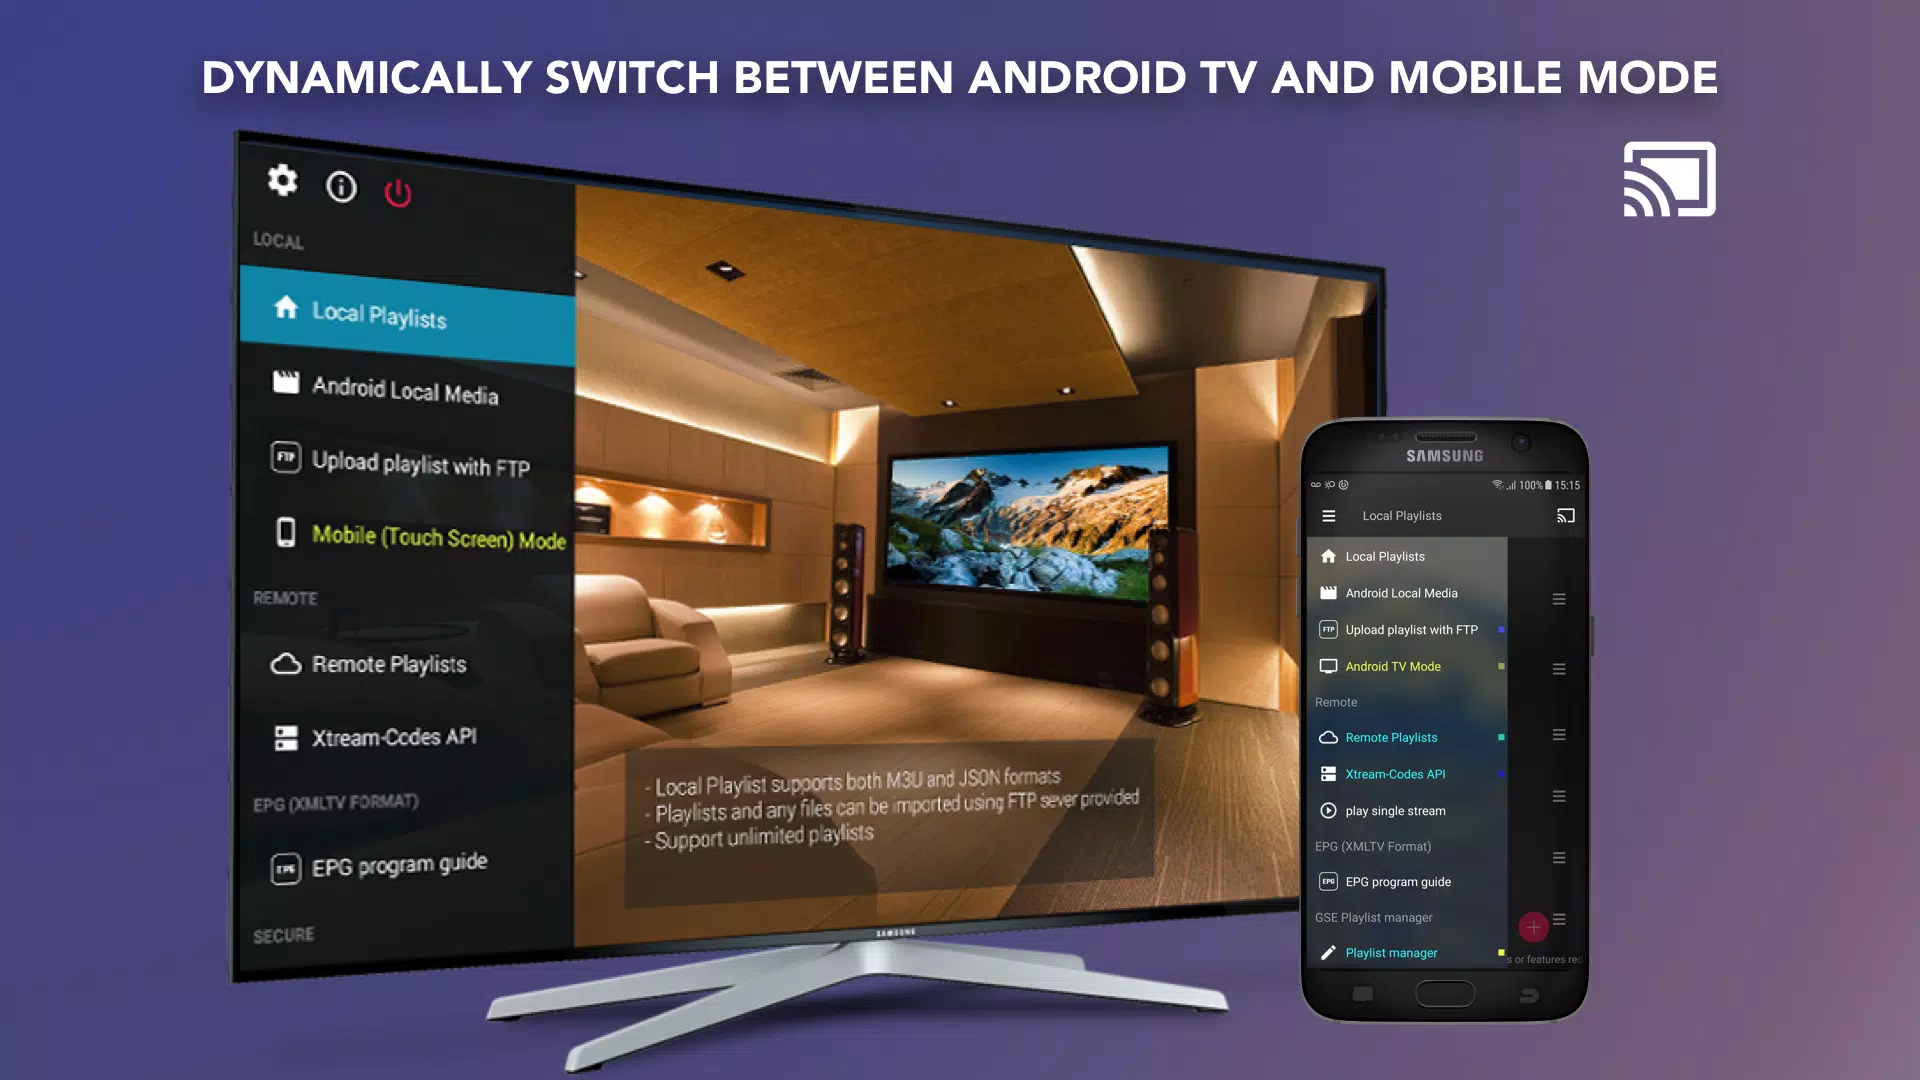 GSE SMART IPTV APK for Android Download